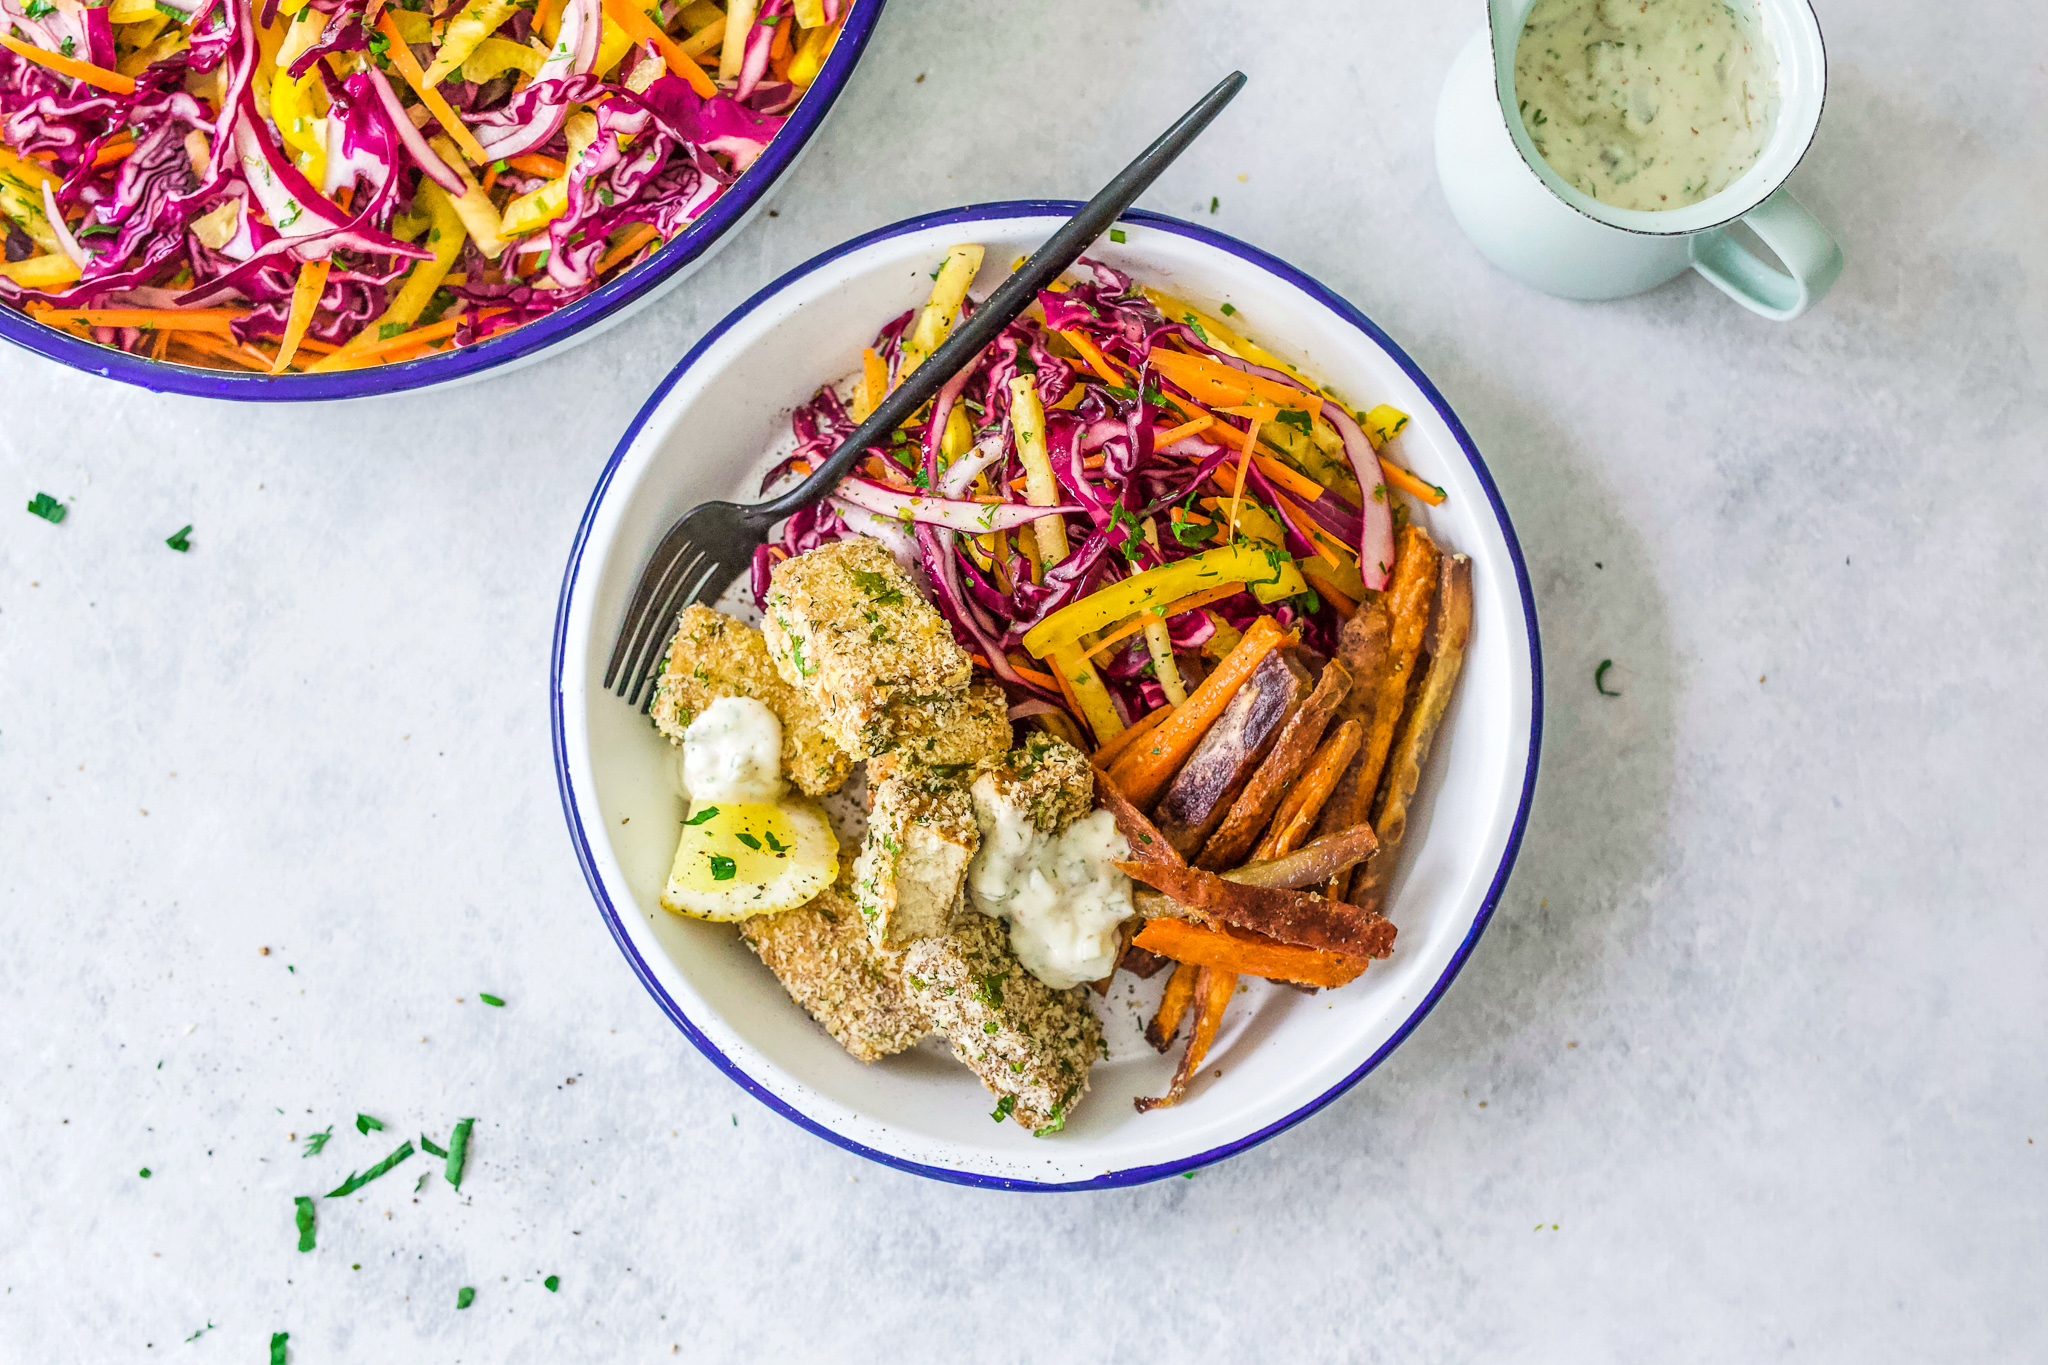 Herb crusted tofu with sweet potato chips